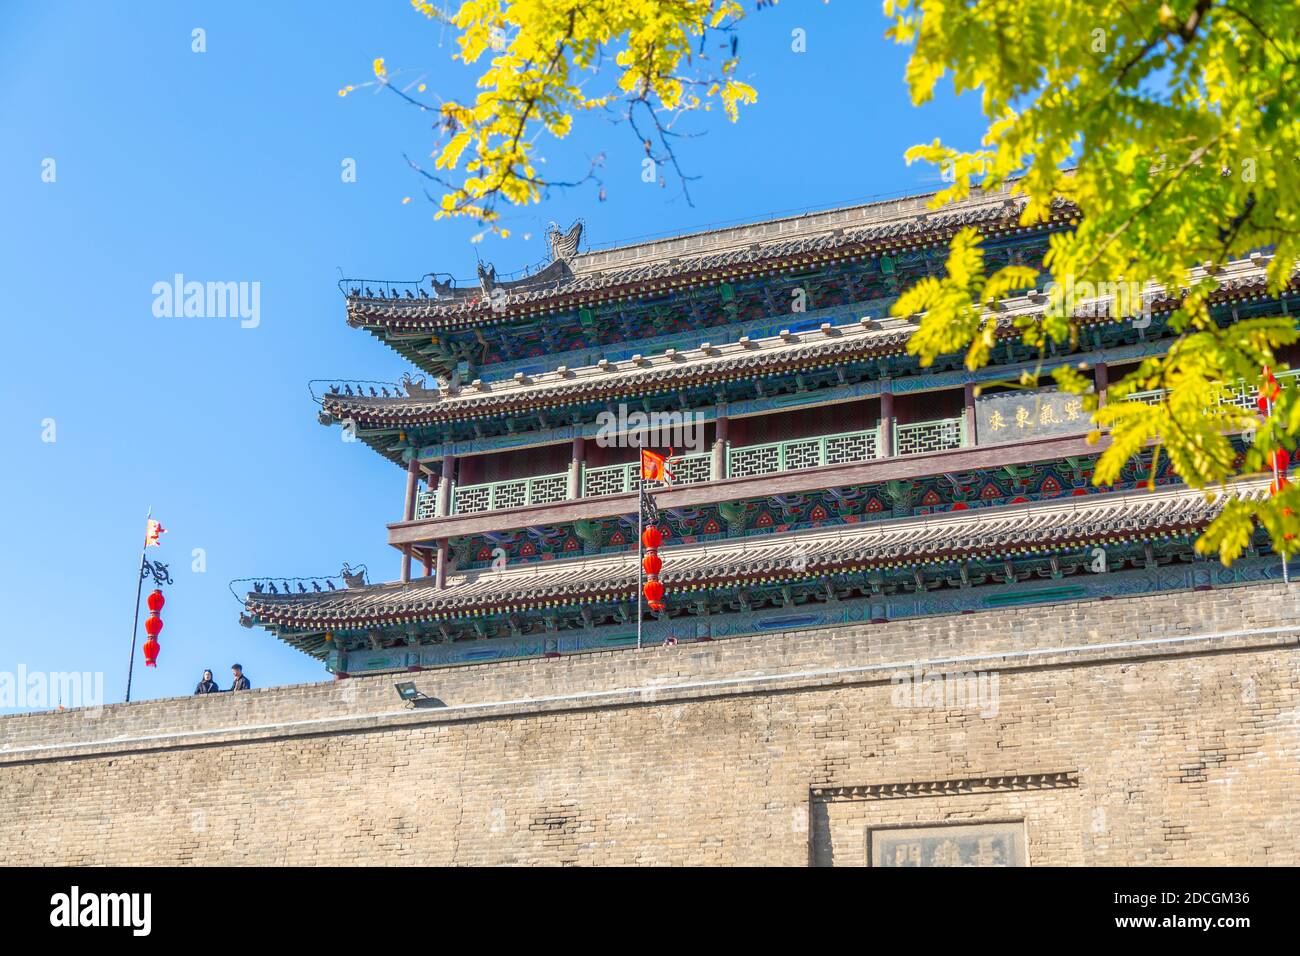 View of the City wall of Xi'an, Shaanxi Province, People's Republic of China, Asia Stock Photo